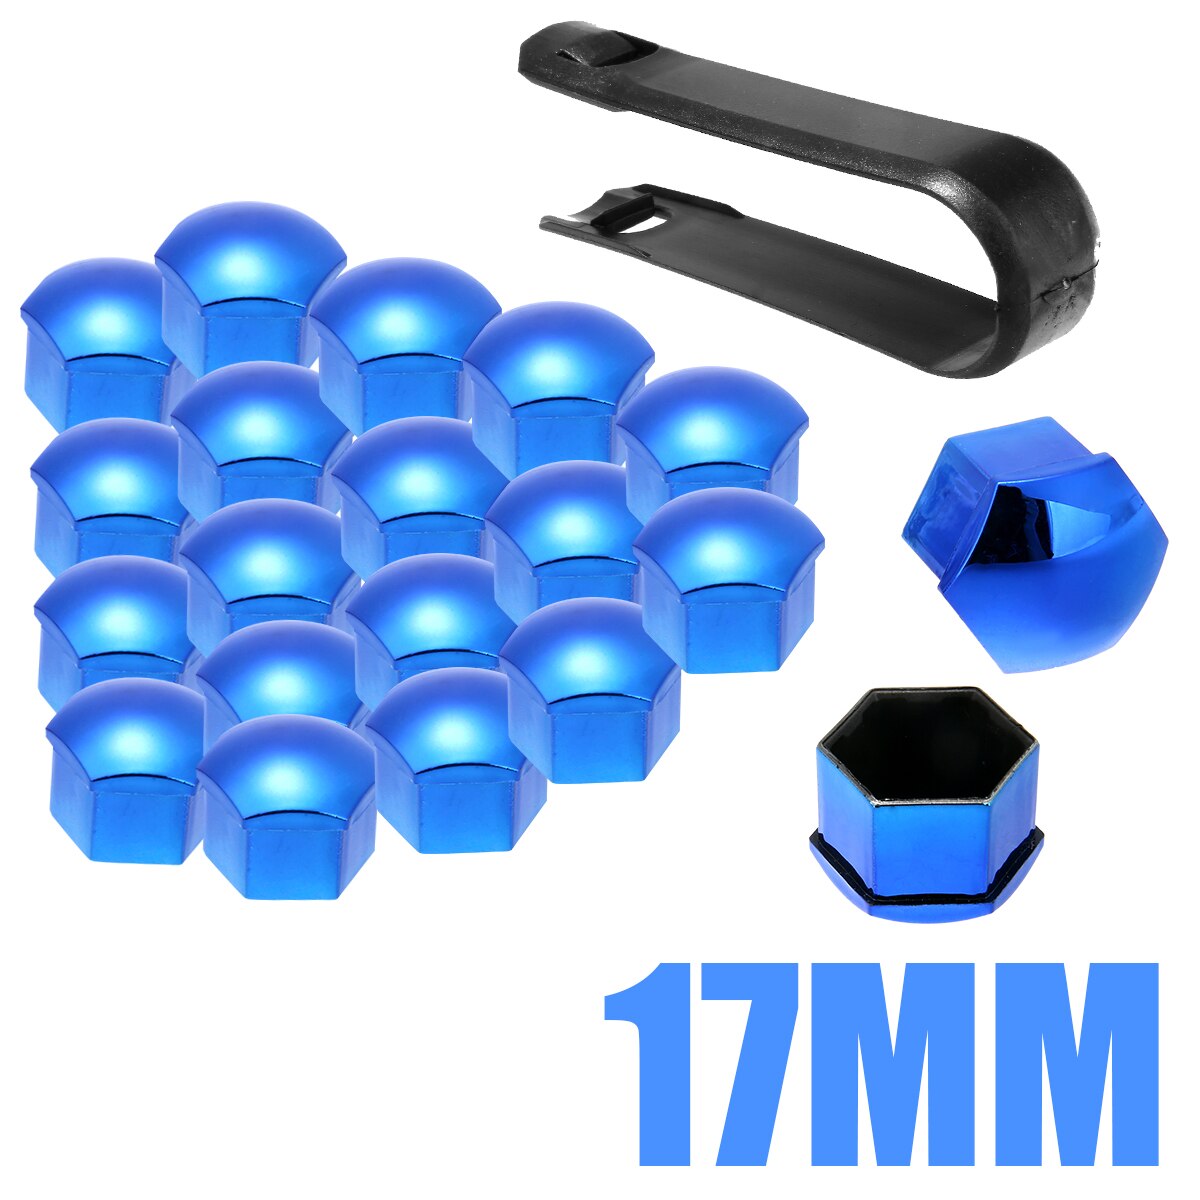 20pcs/set 17/19/21mm Universal Wheel Nut Bolt Cover Cap Exterior Decoration Protecting Bolt + Removal Tool Red/Blue: blue 17MM